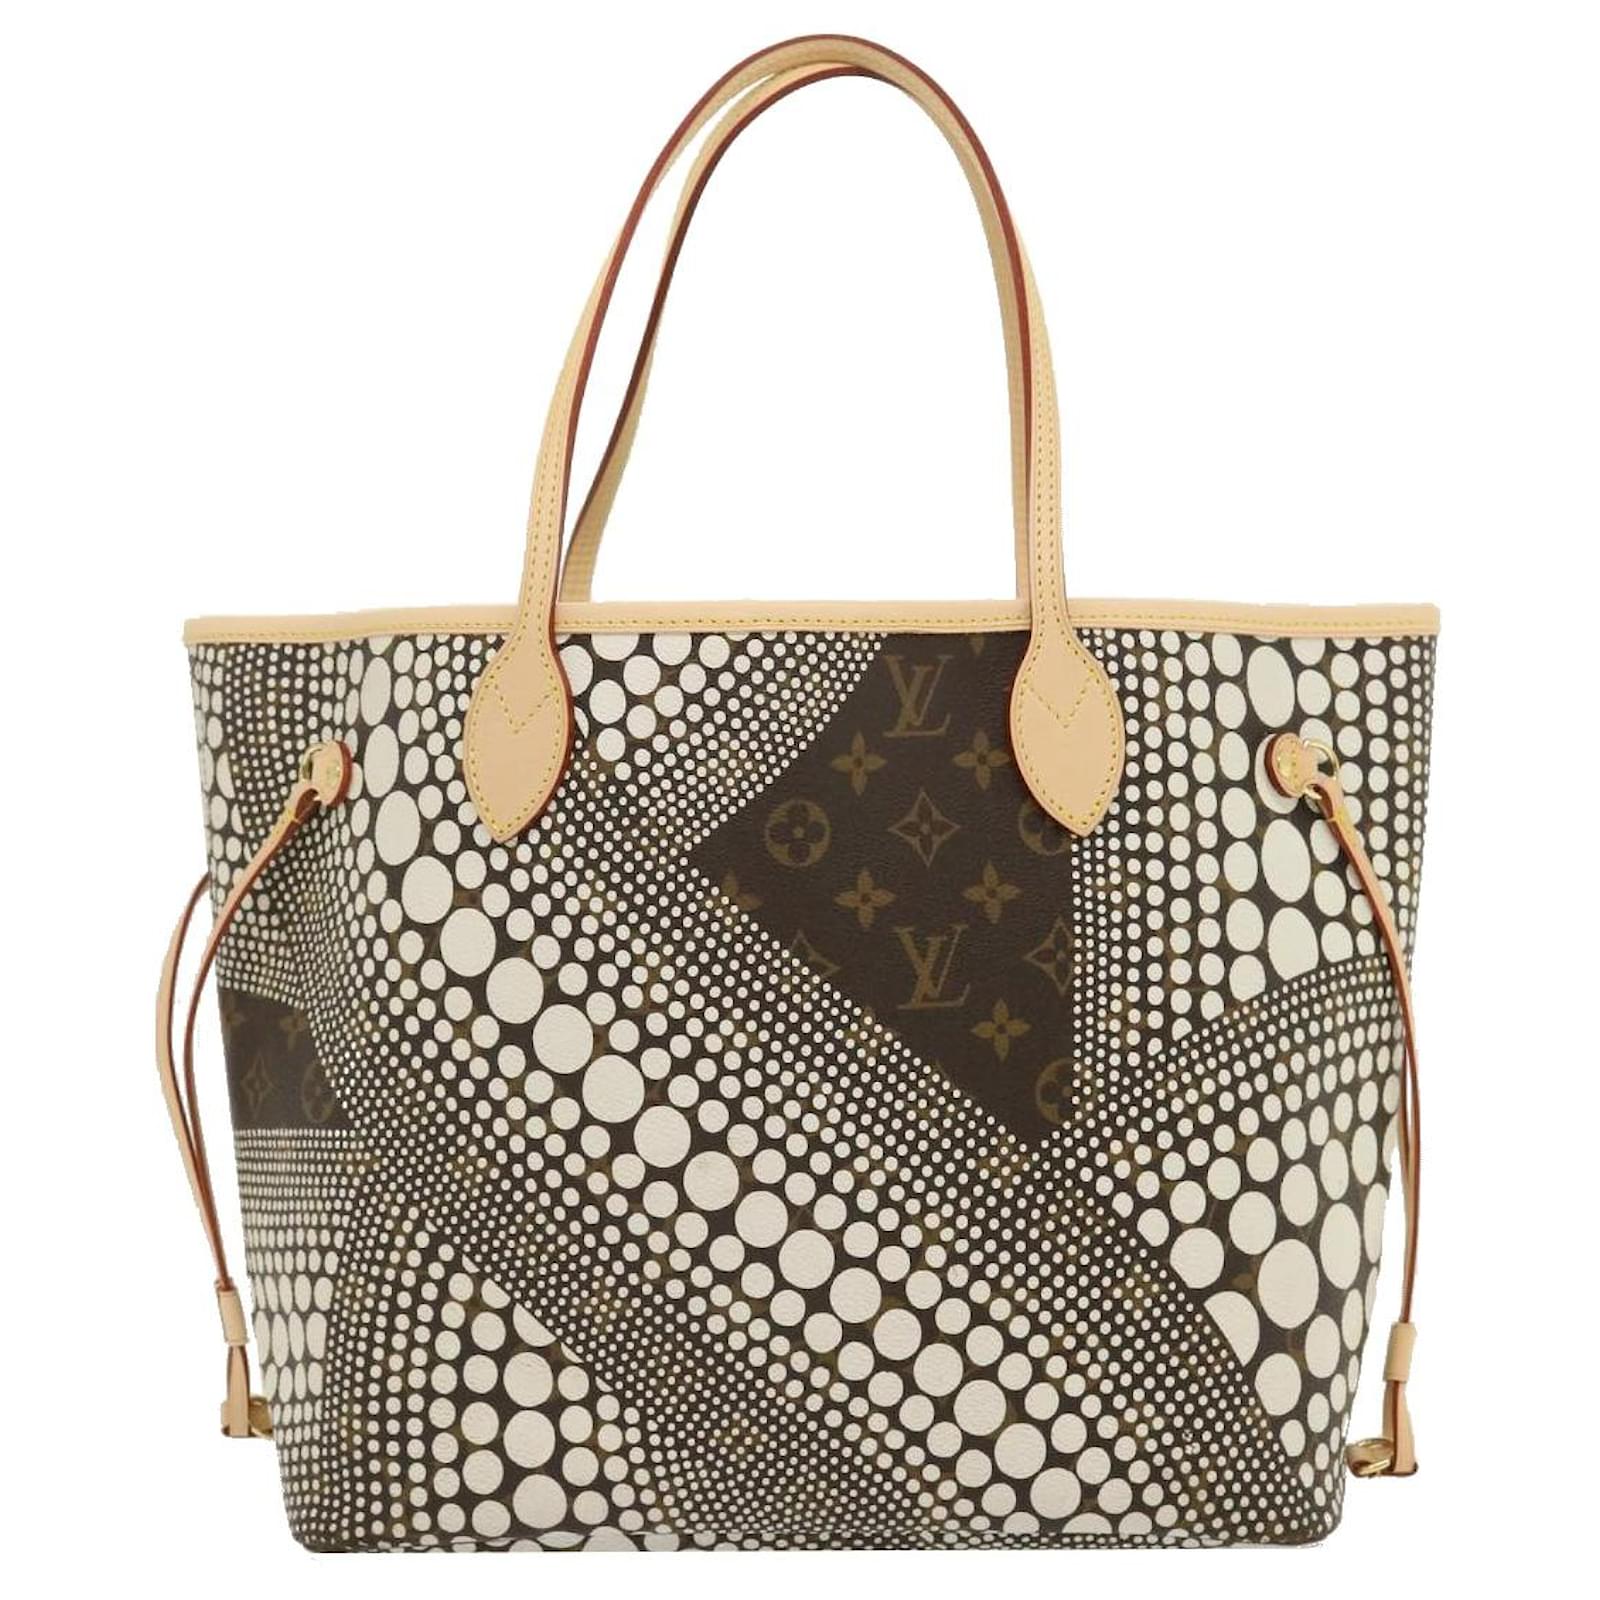 Totes Louis Vuitton Louis Vuitton Monogram Wild at Heart Neverfull mm Tote Bag M45819 Auth 30747a